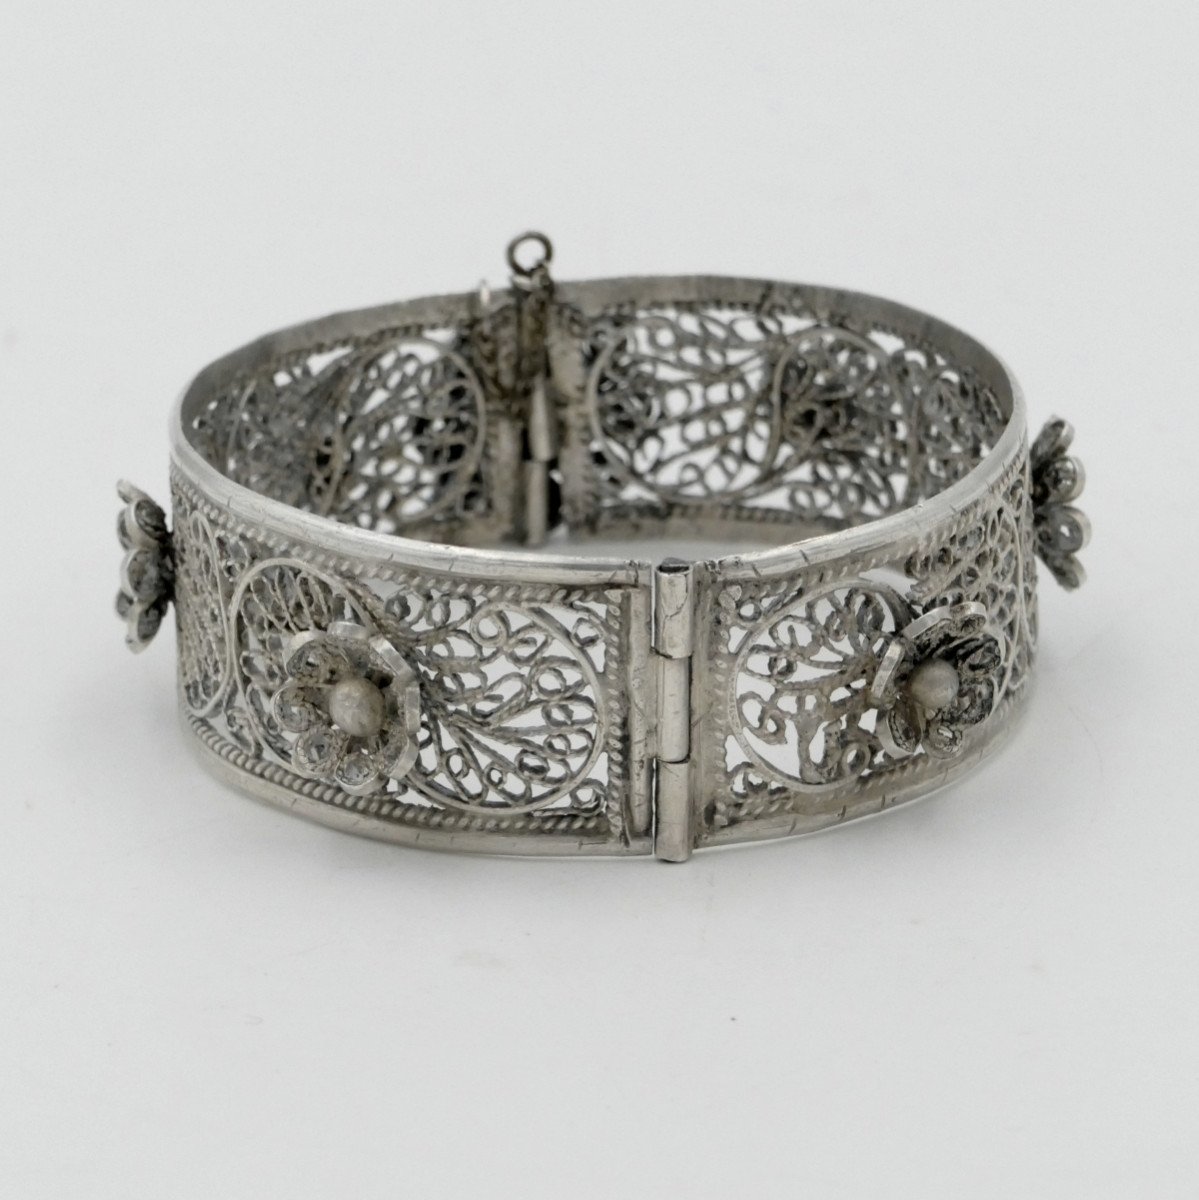 Cuff Bracelet With Flower Decor, Sterling Silver, Tunisia, 20th Century.-photo-3